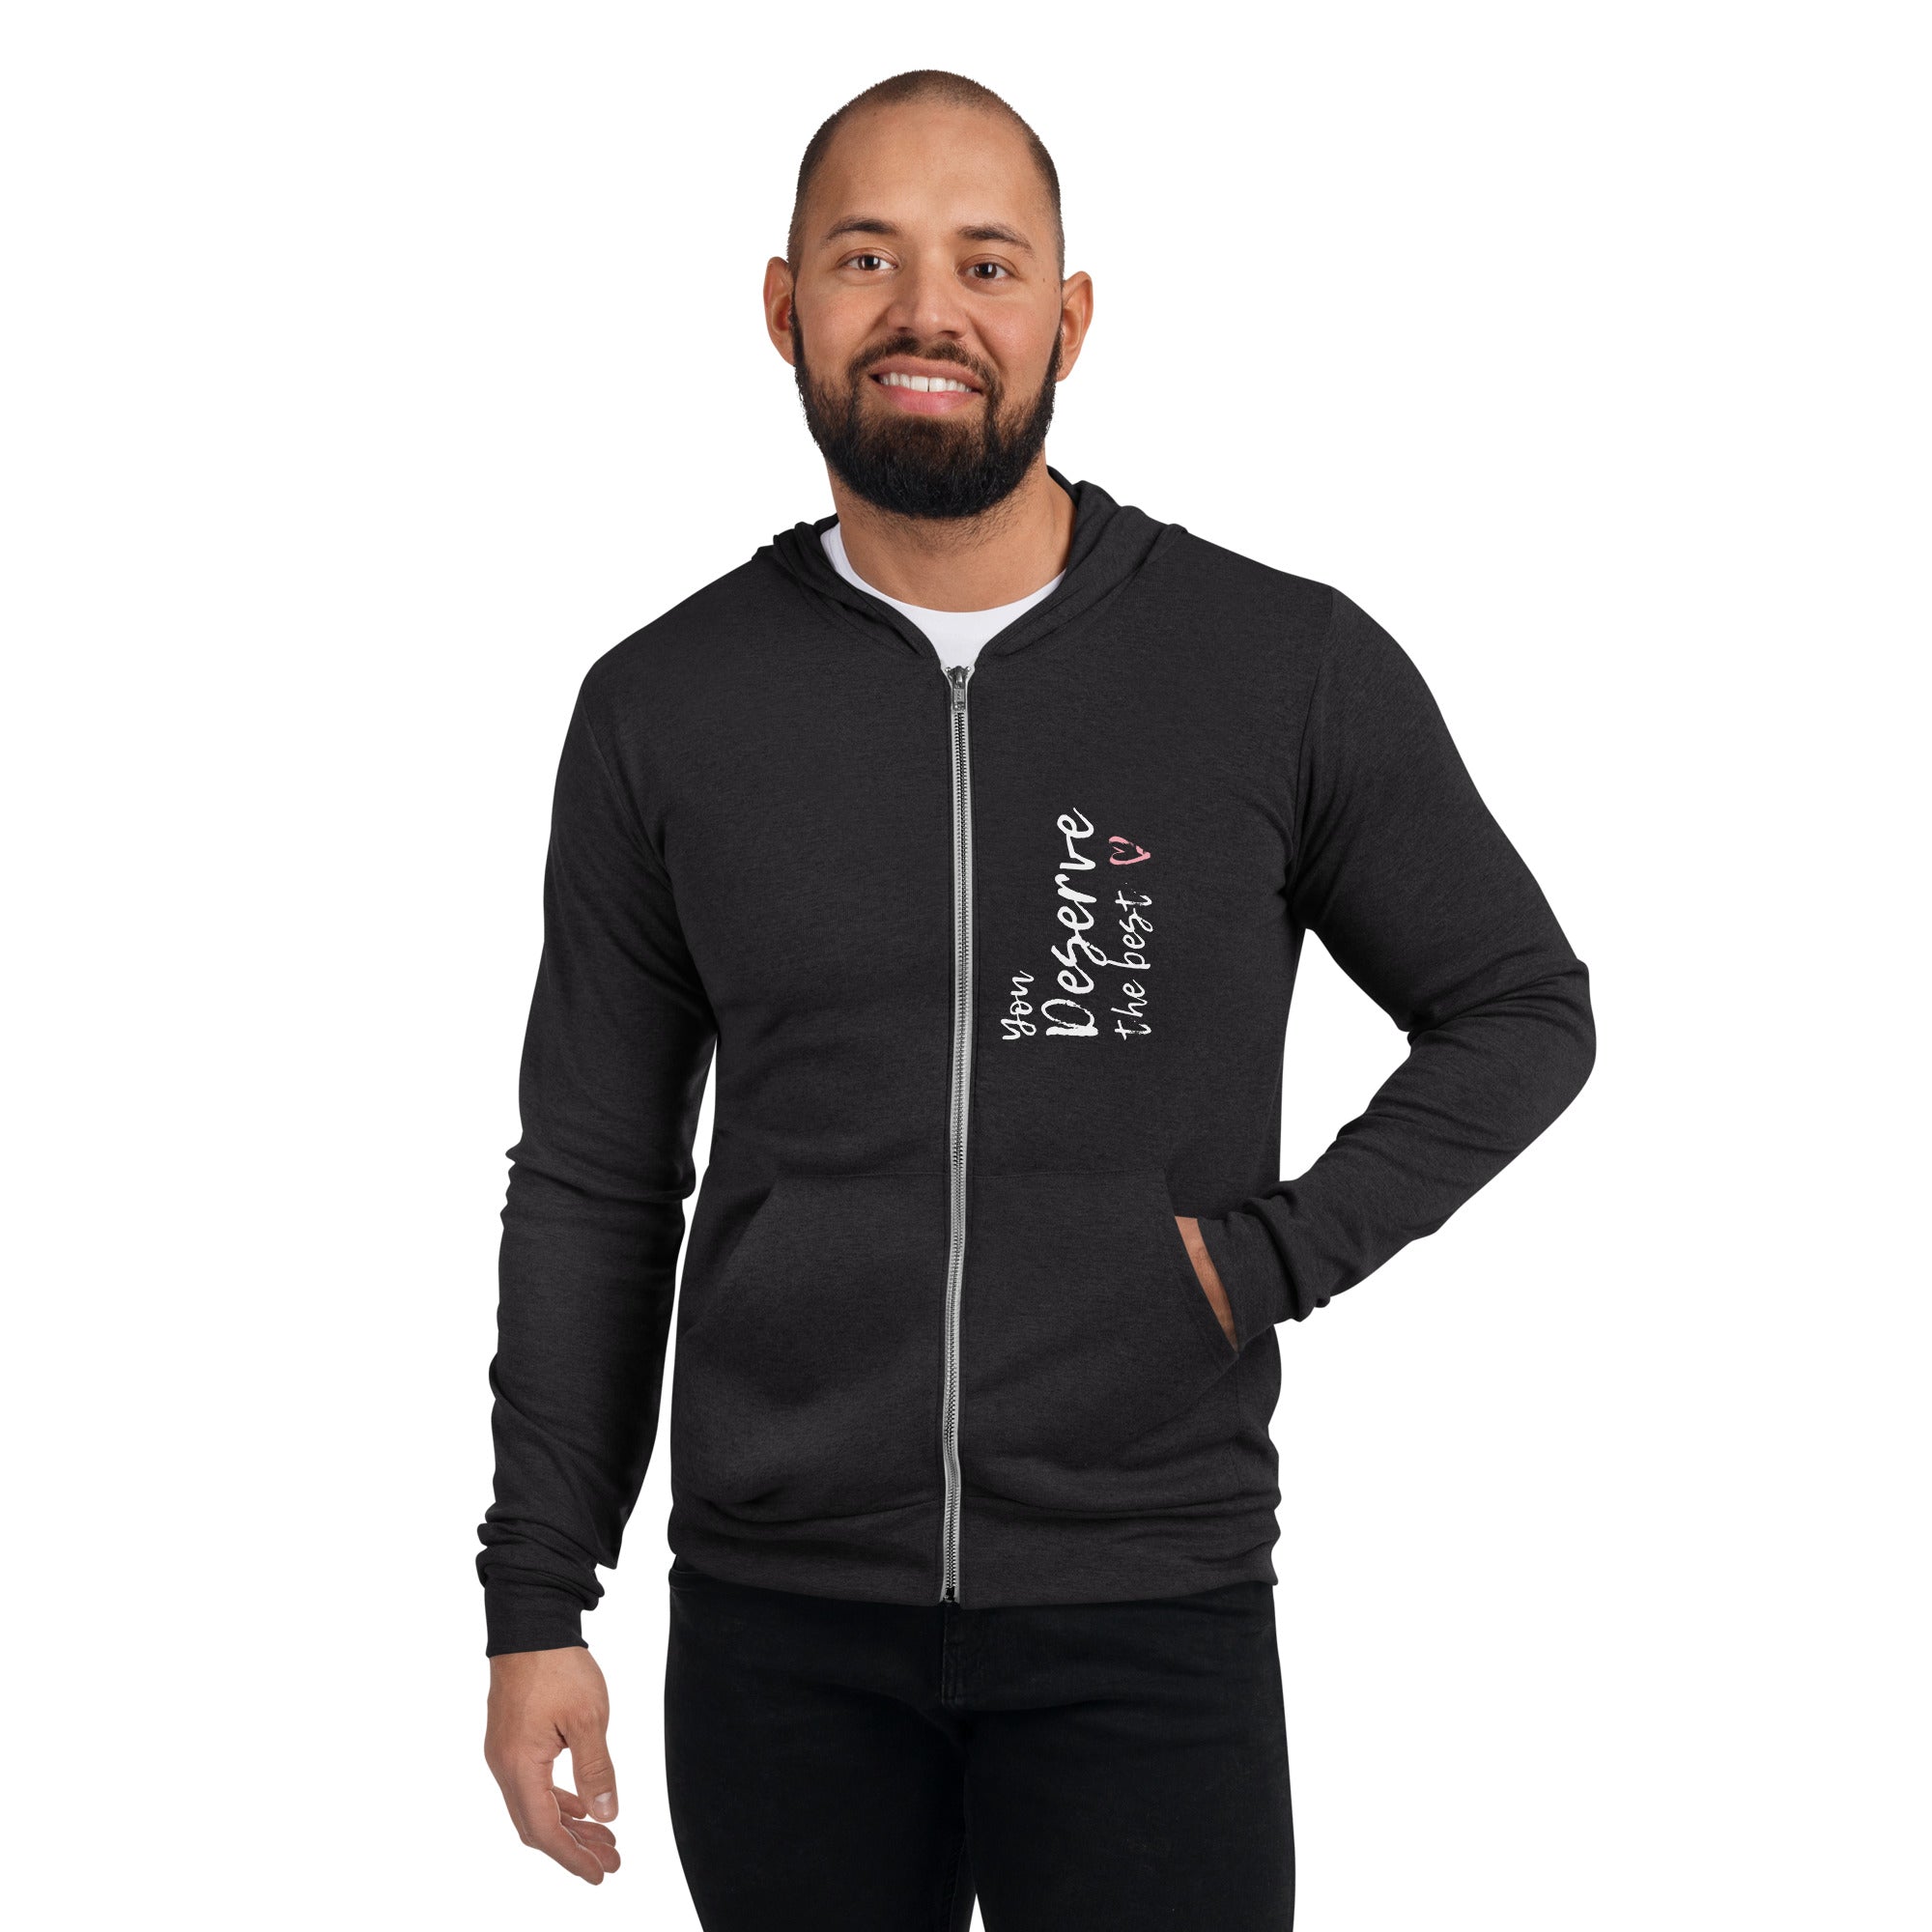 You Deserve The Best, Unisex zip hoodie | Positive Affirmation Clothing